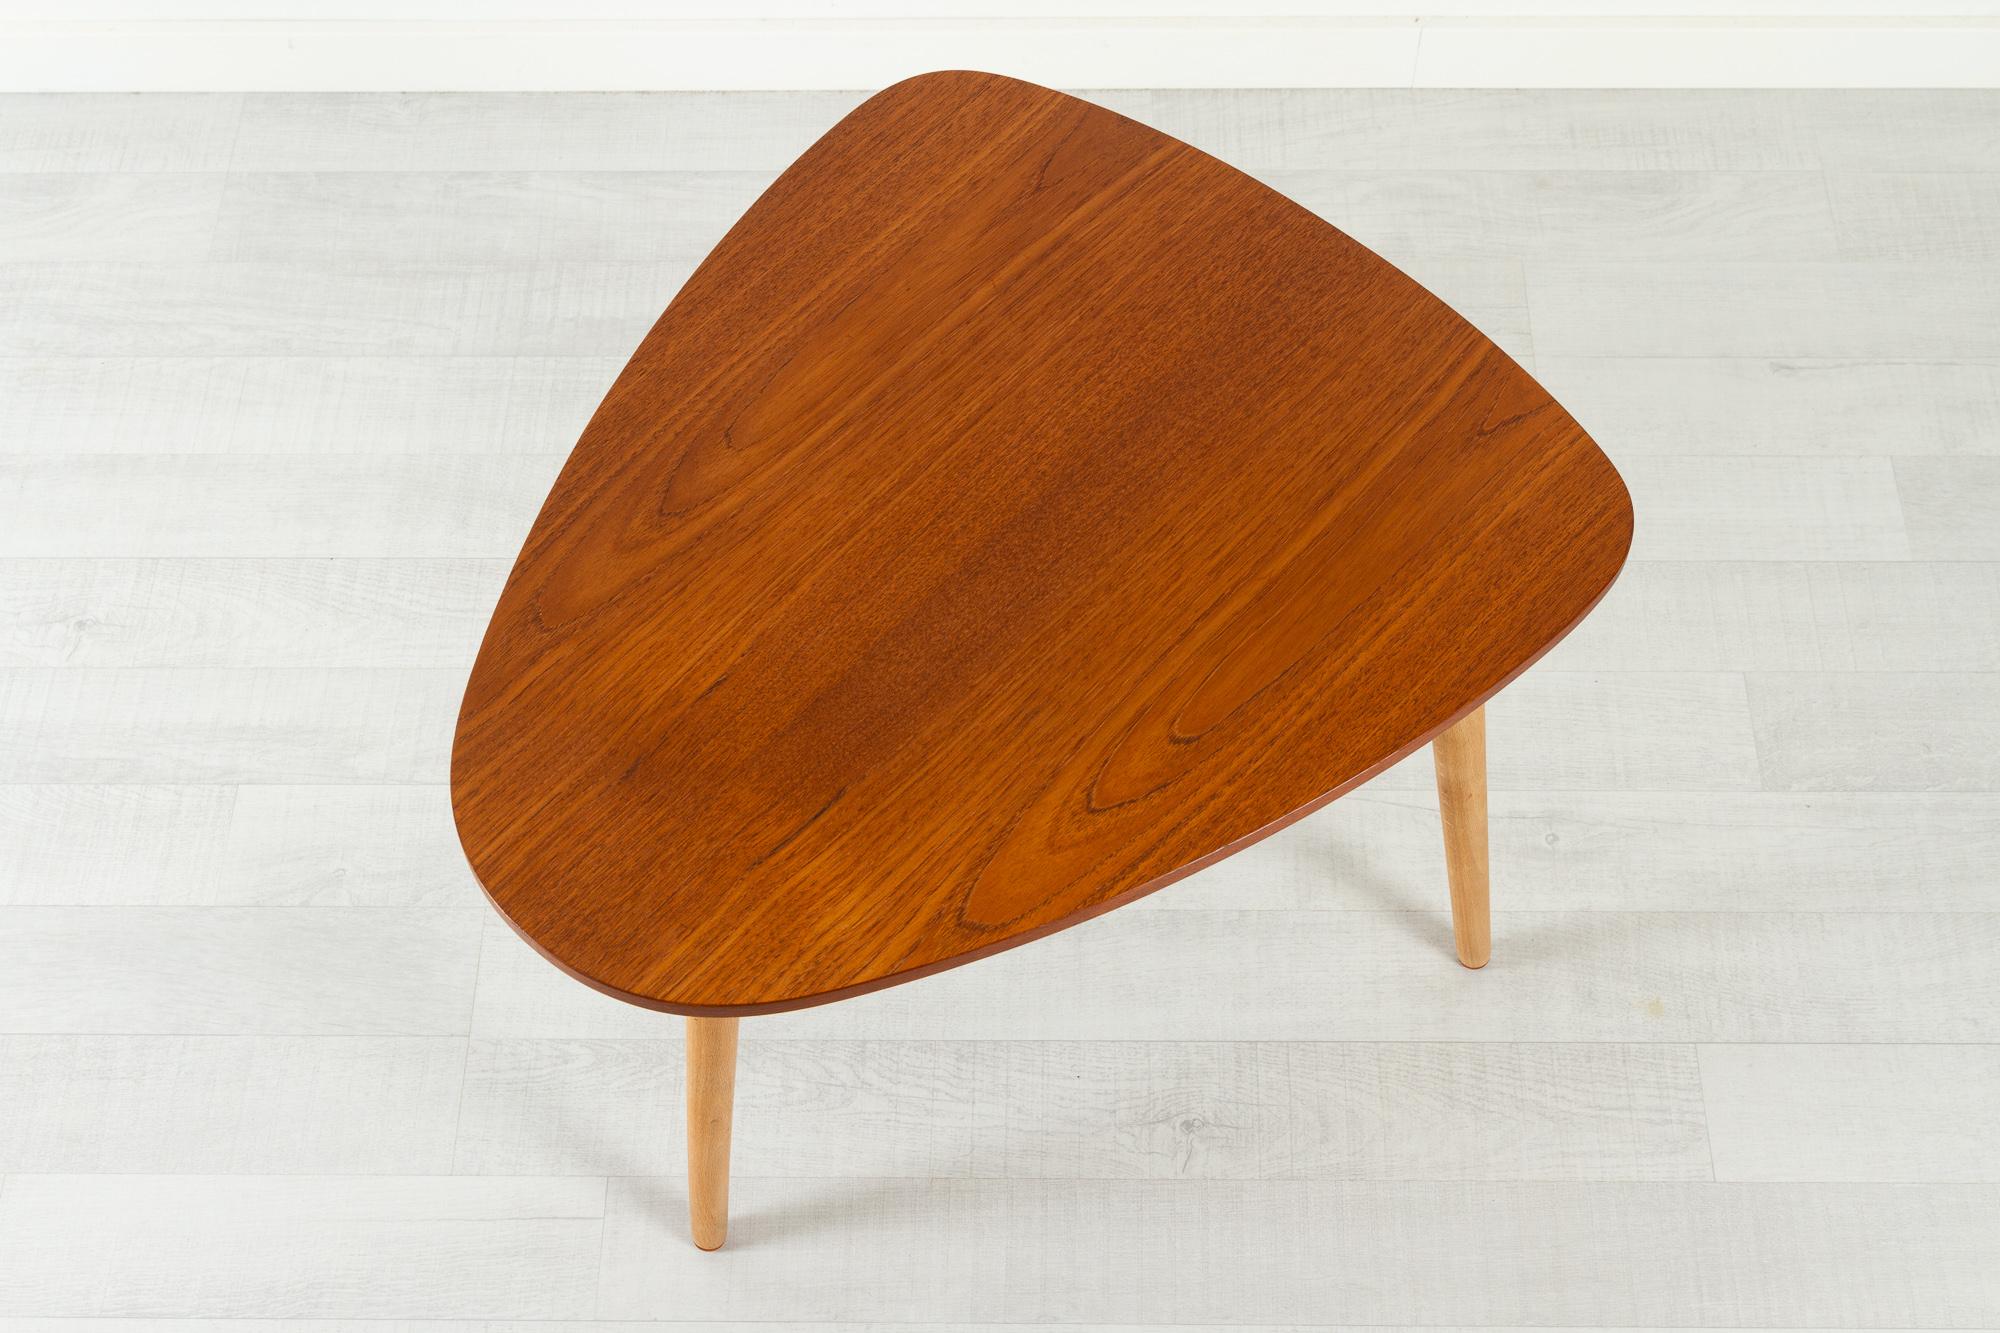 Vintage Danish teak tripod side table 1960s
Danish Mid-Century Modern three legged coffee table with triangular table top. Top with beautiful teak veneer. Three round tapered legs in solid beech.
Suitable for many purposes i.e. side table, lamp